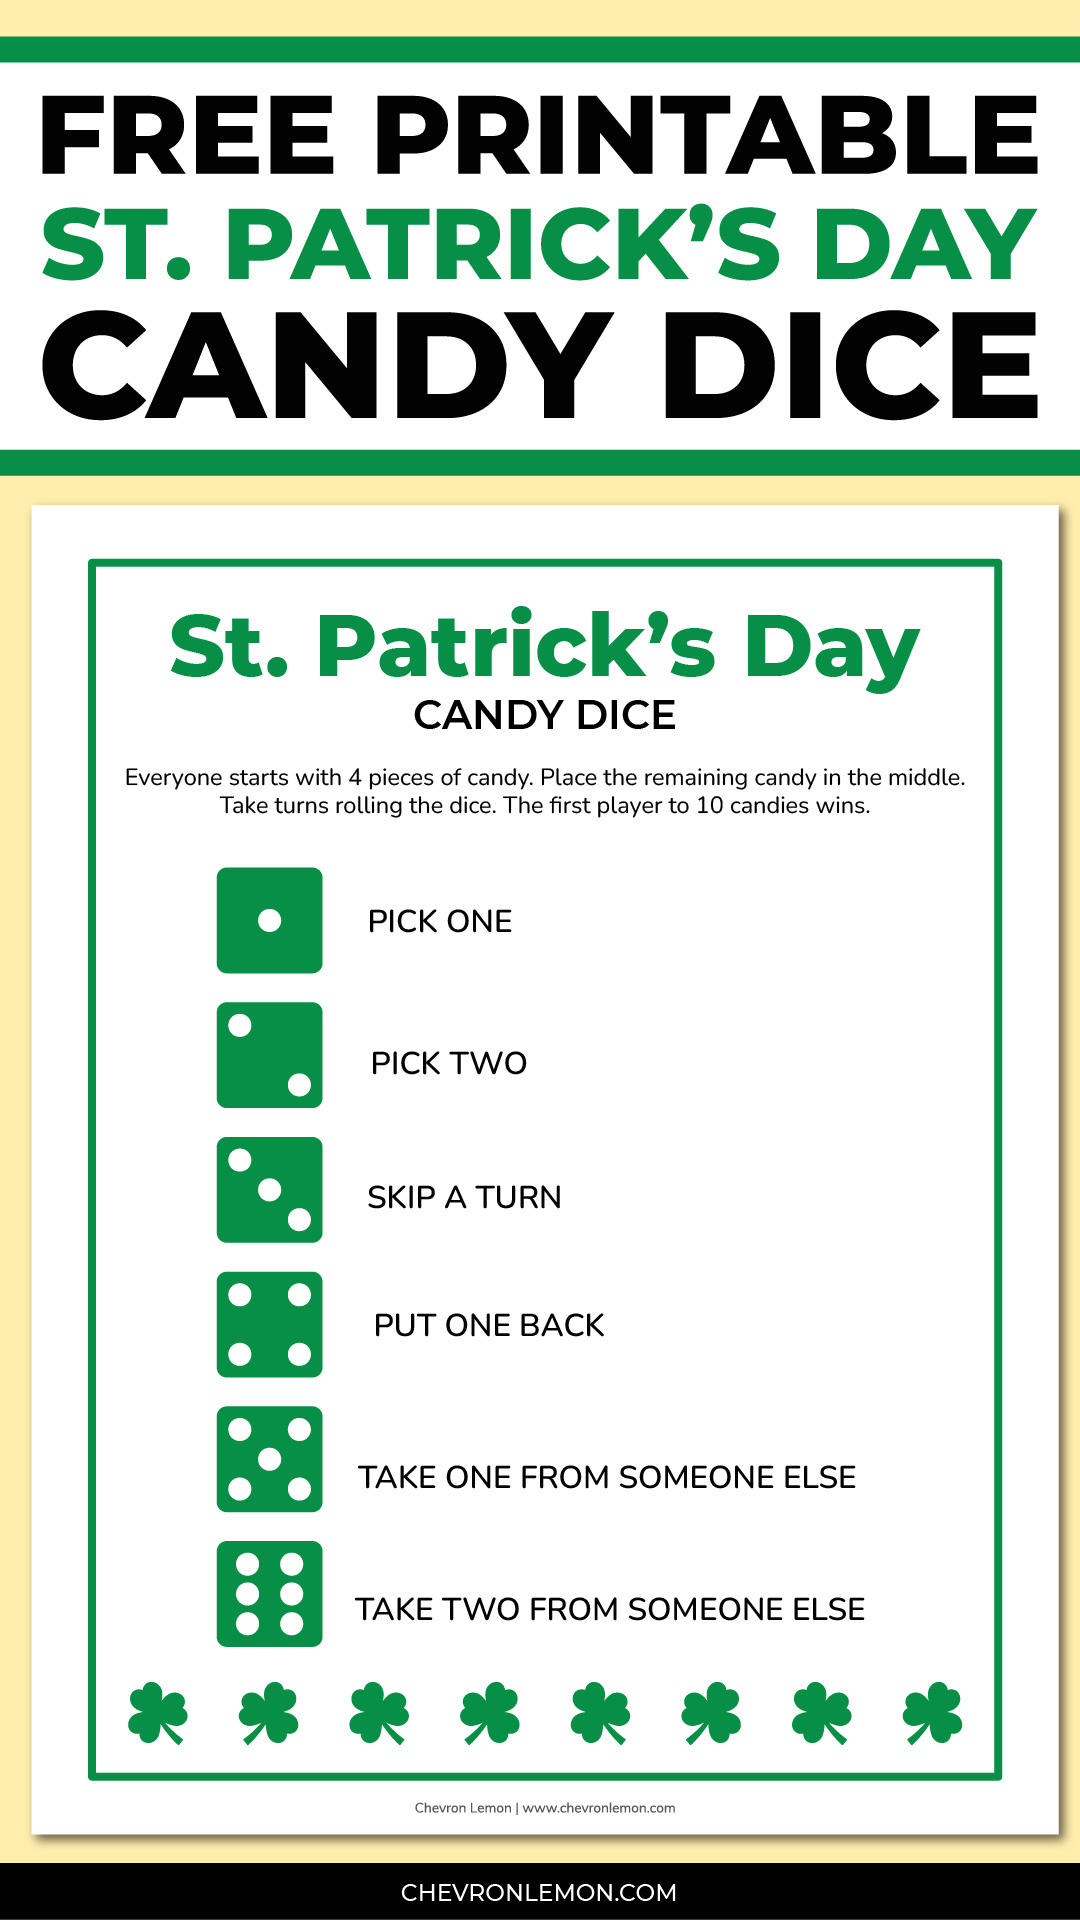 St. Patrick's Day candy dice